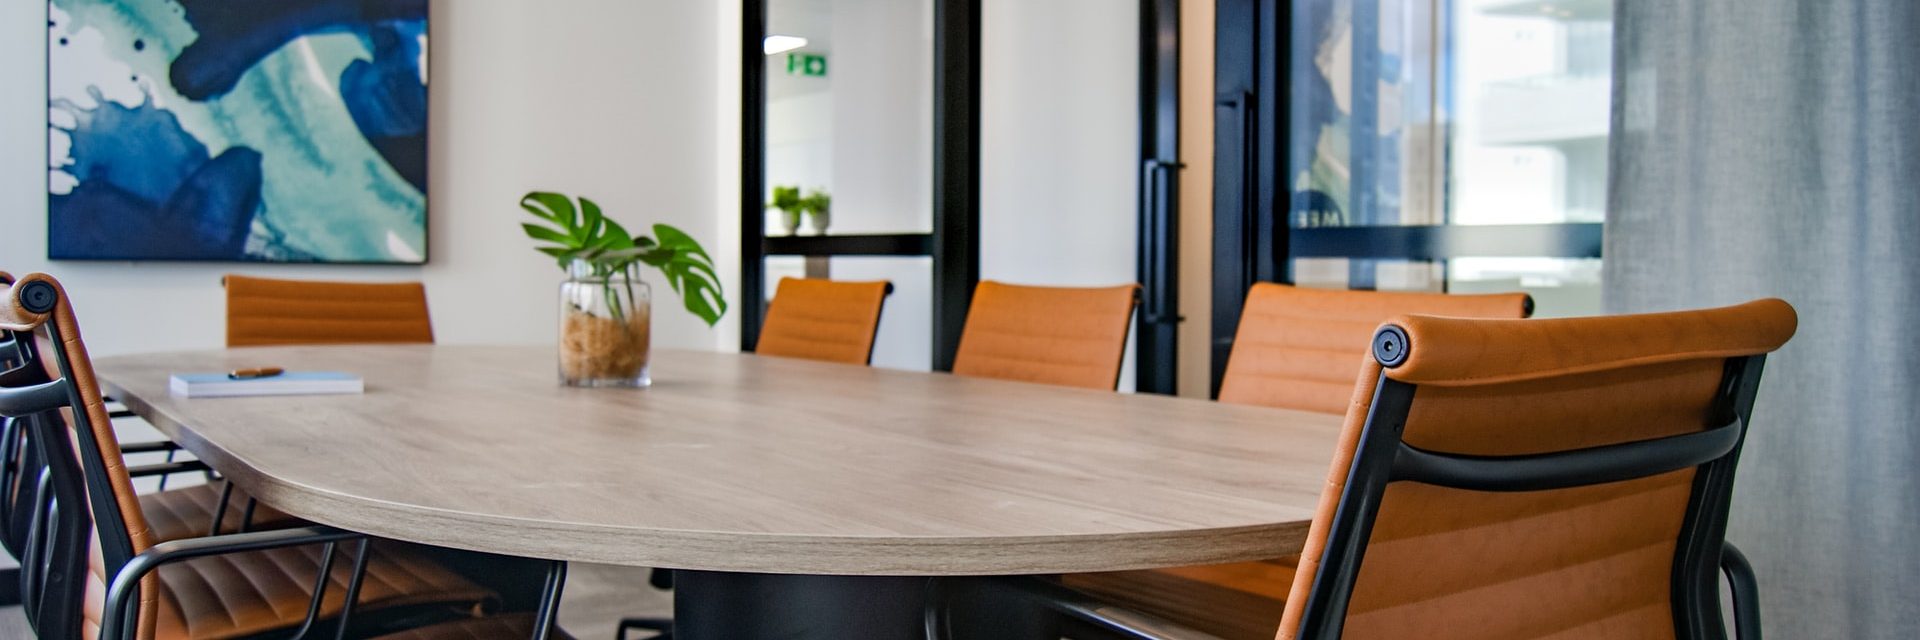 Top 7 Coworking Space Benefits for Startups and Entrepreneurs | The Office Pass